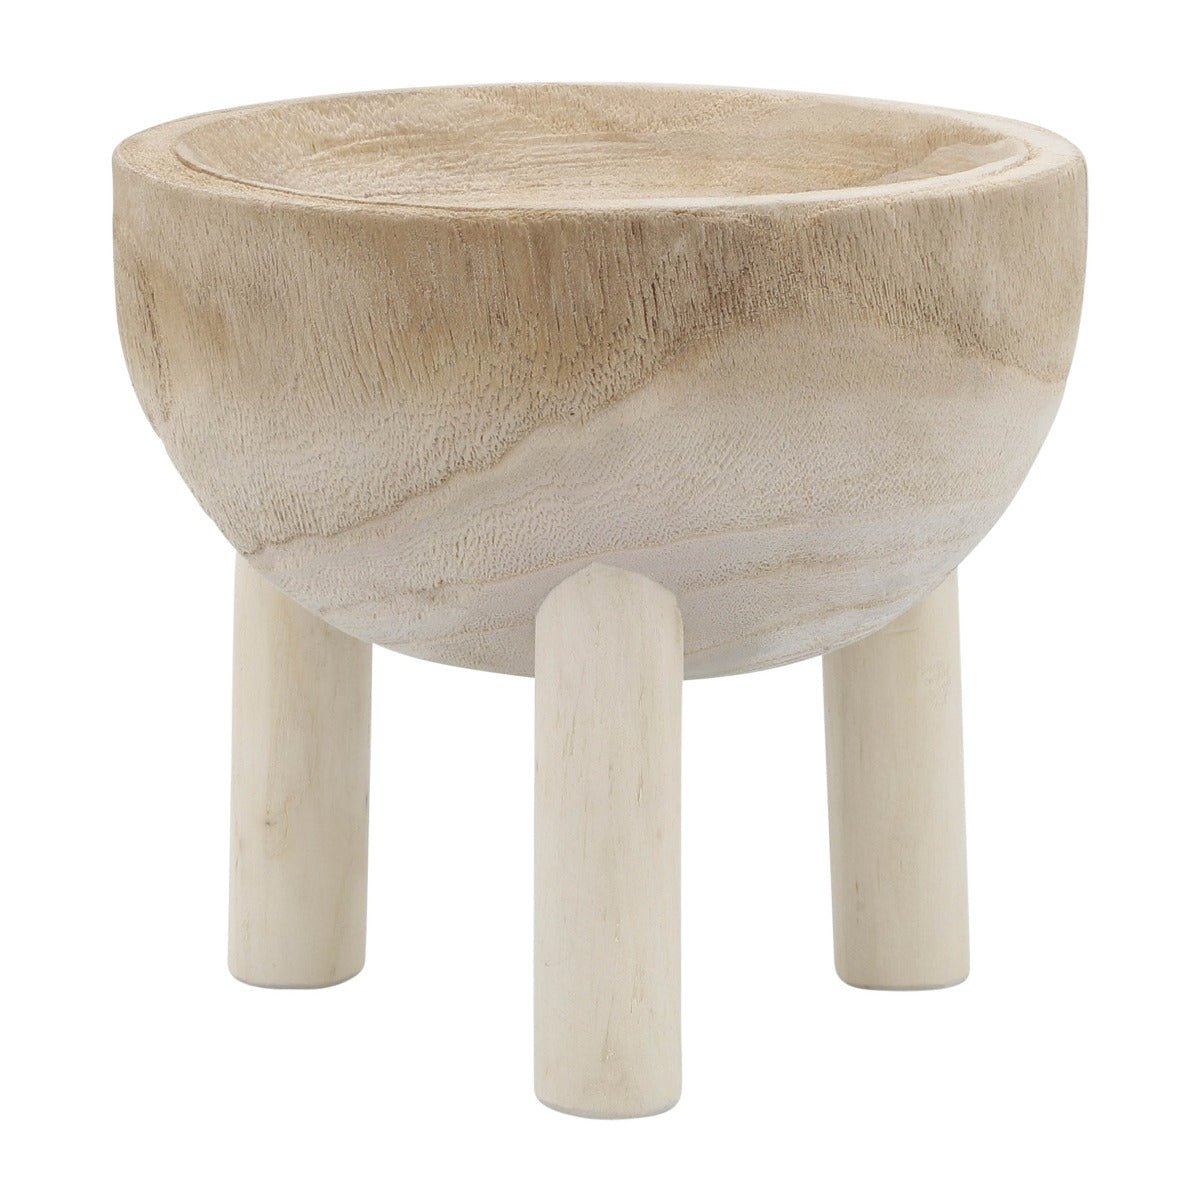 Sagebrook Home Natural Paulownia Wood Bowl with Legs, 8" - lily & onyx